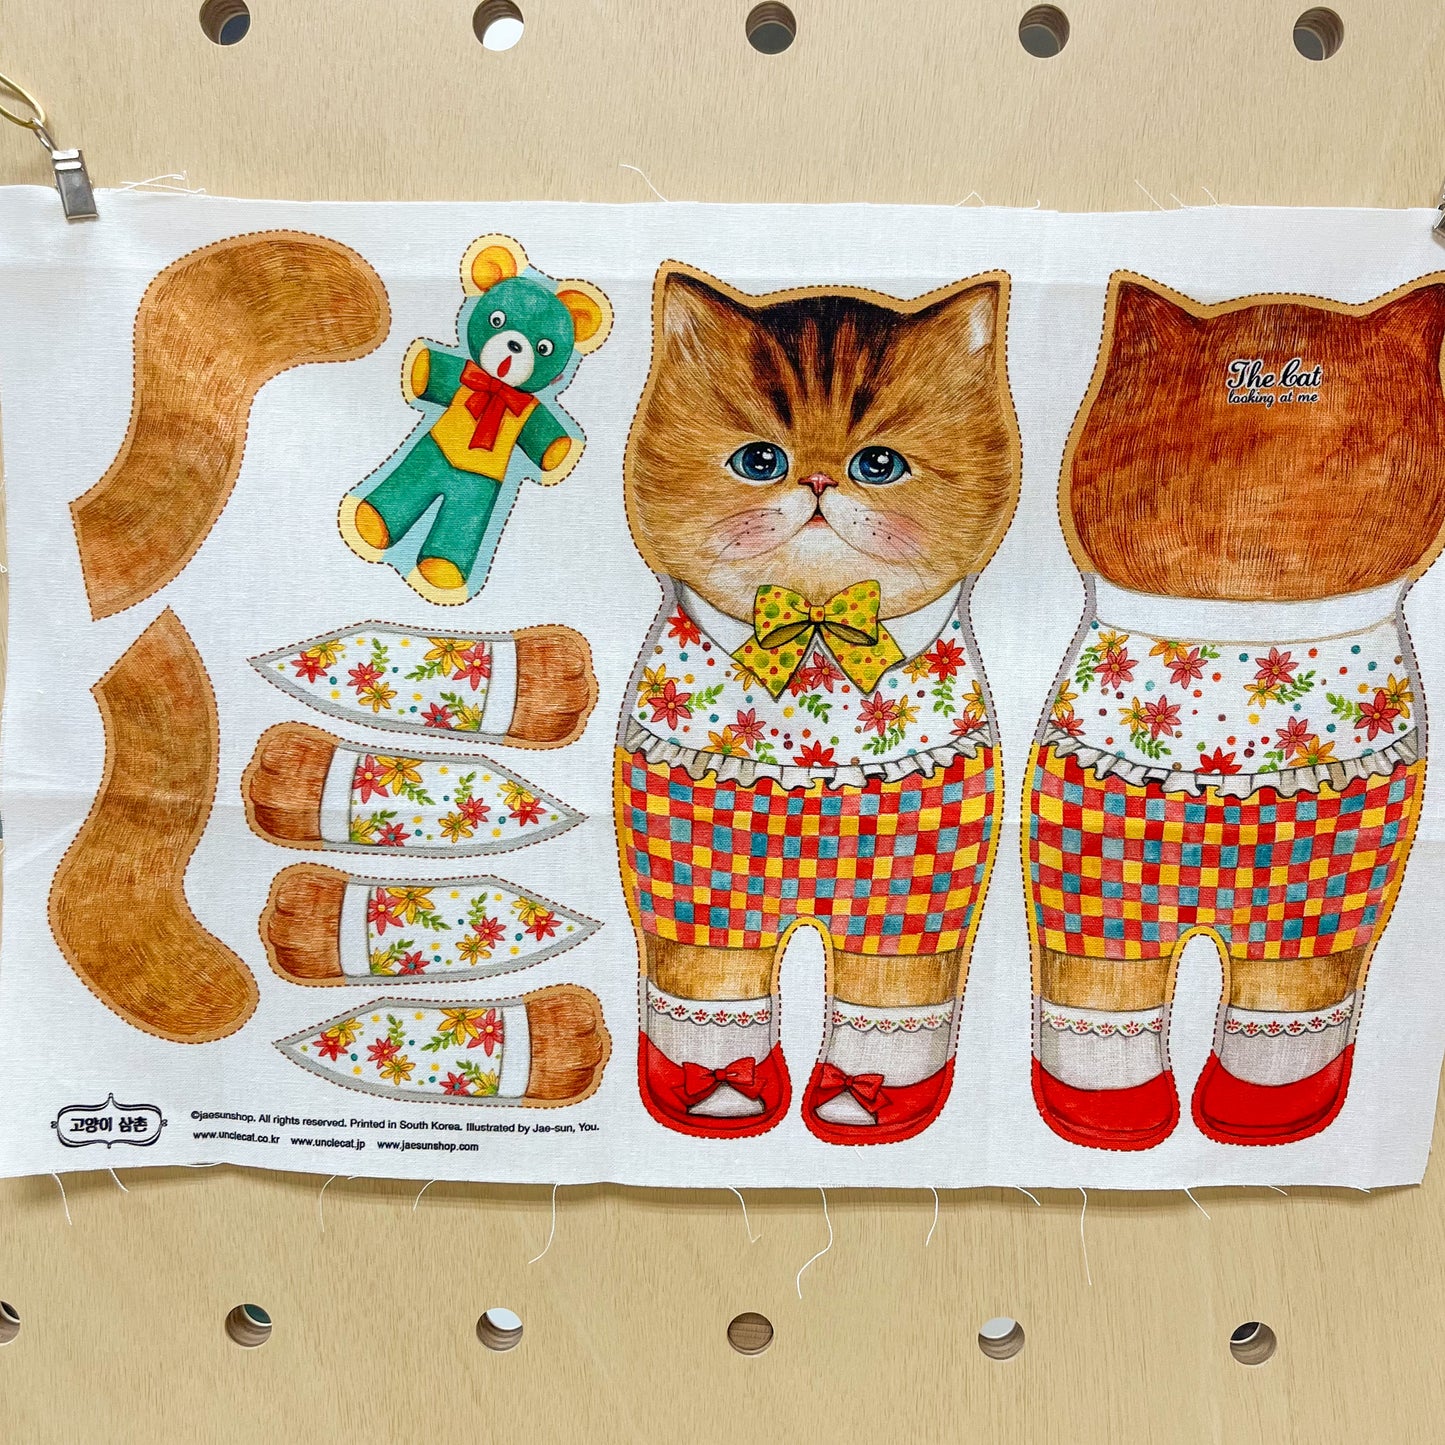 Unclecat 貓叔叔 | diy fabric for making cat doll "Check" | cotton linen 棉麻